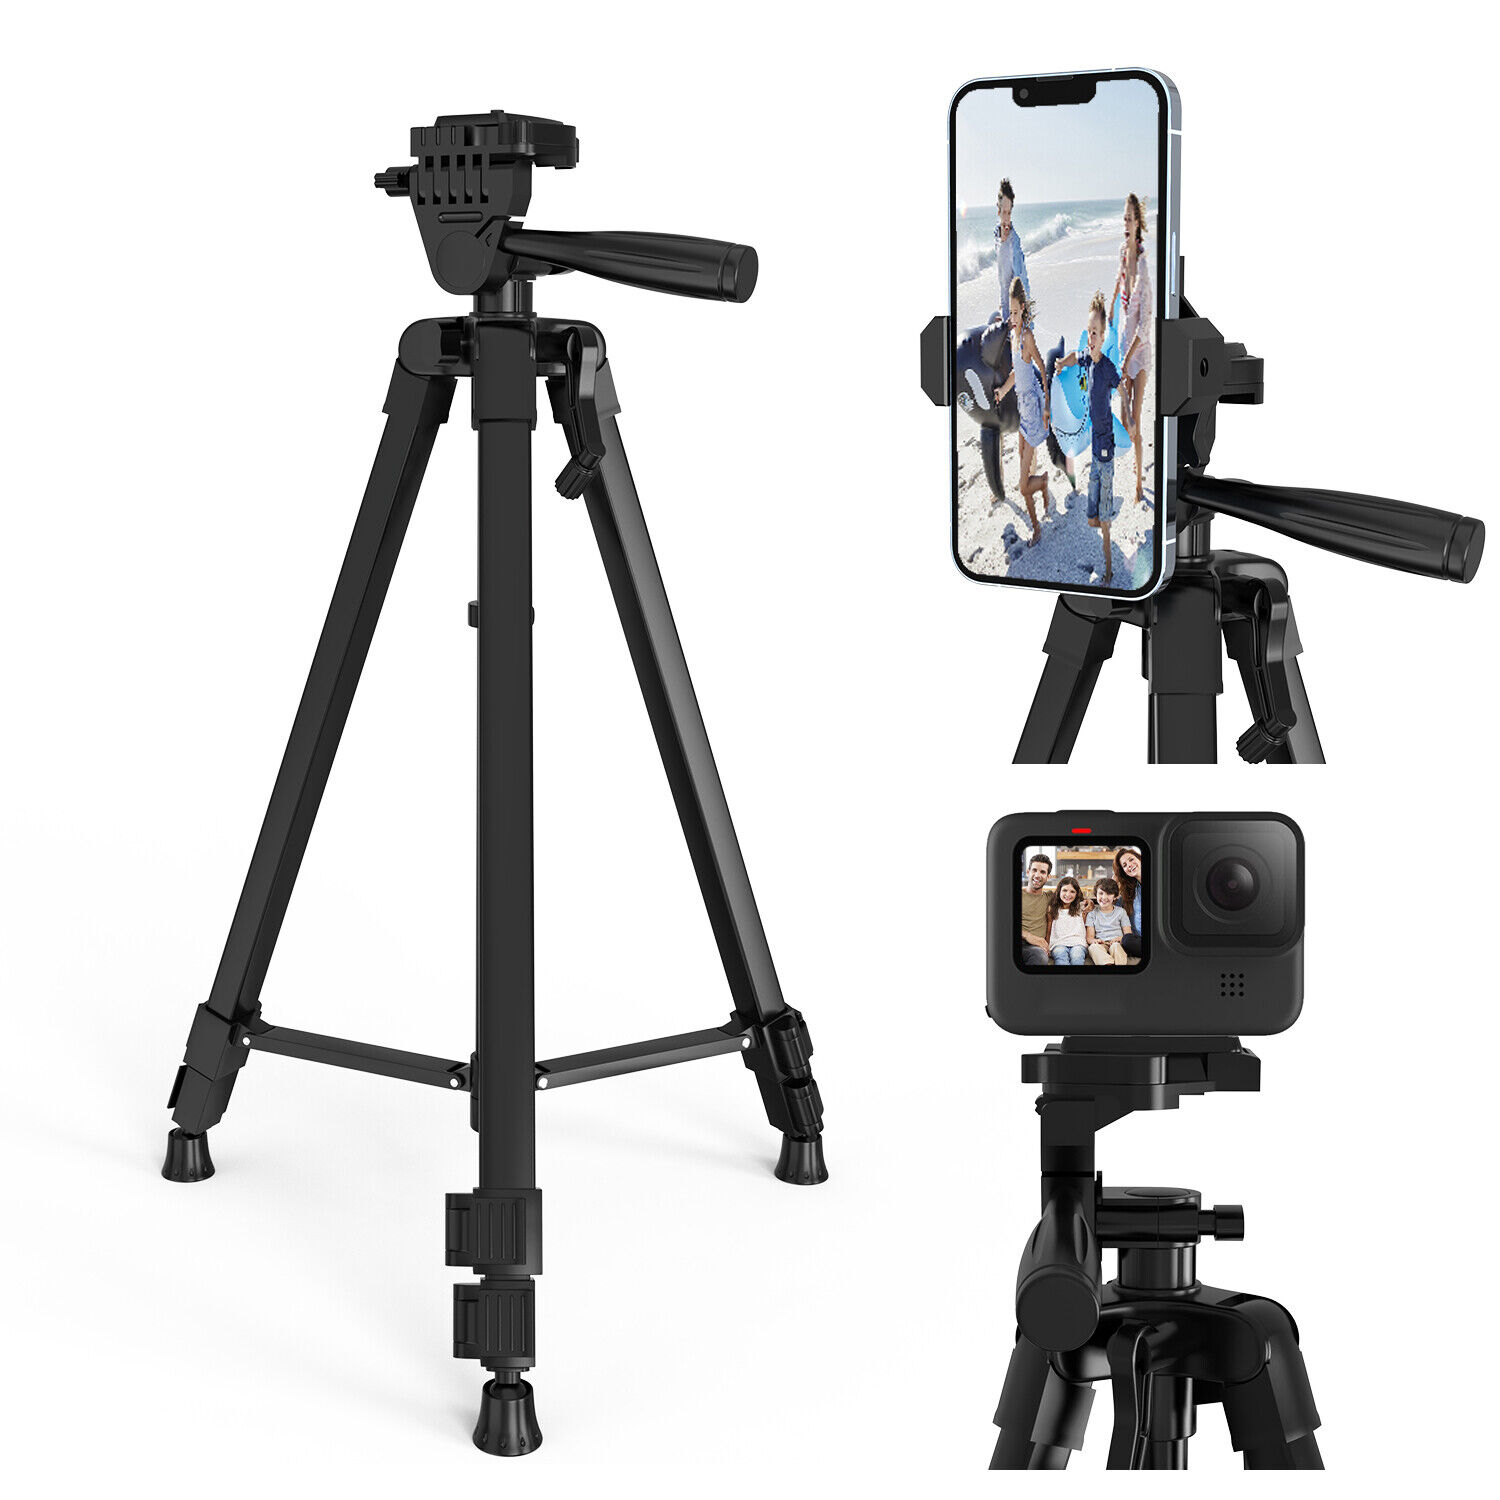 Professional Camera Tripod Stand Holder Mount For Samsung iPhone Cell Phone+ Bag